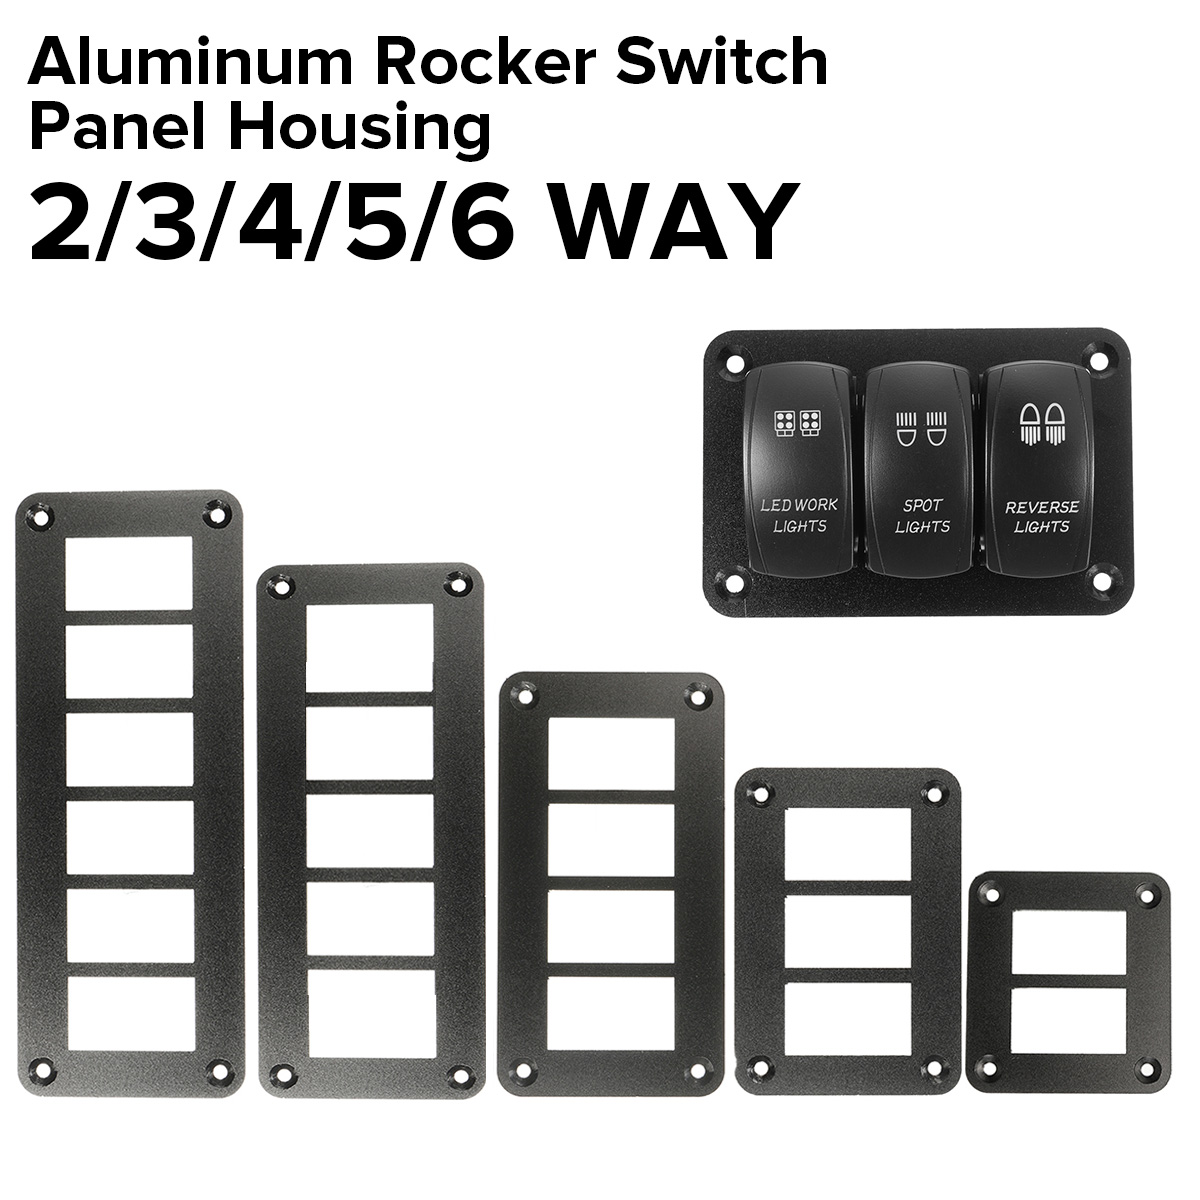 Aluminum-Rocker-Switch-Panel-Housing-Holder-for-ARB-Carling-Narva-Boat-Type-Auto-Parts-Switches-Part-1706109-1